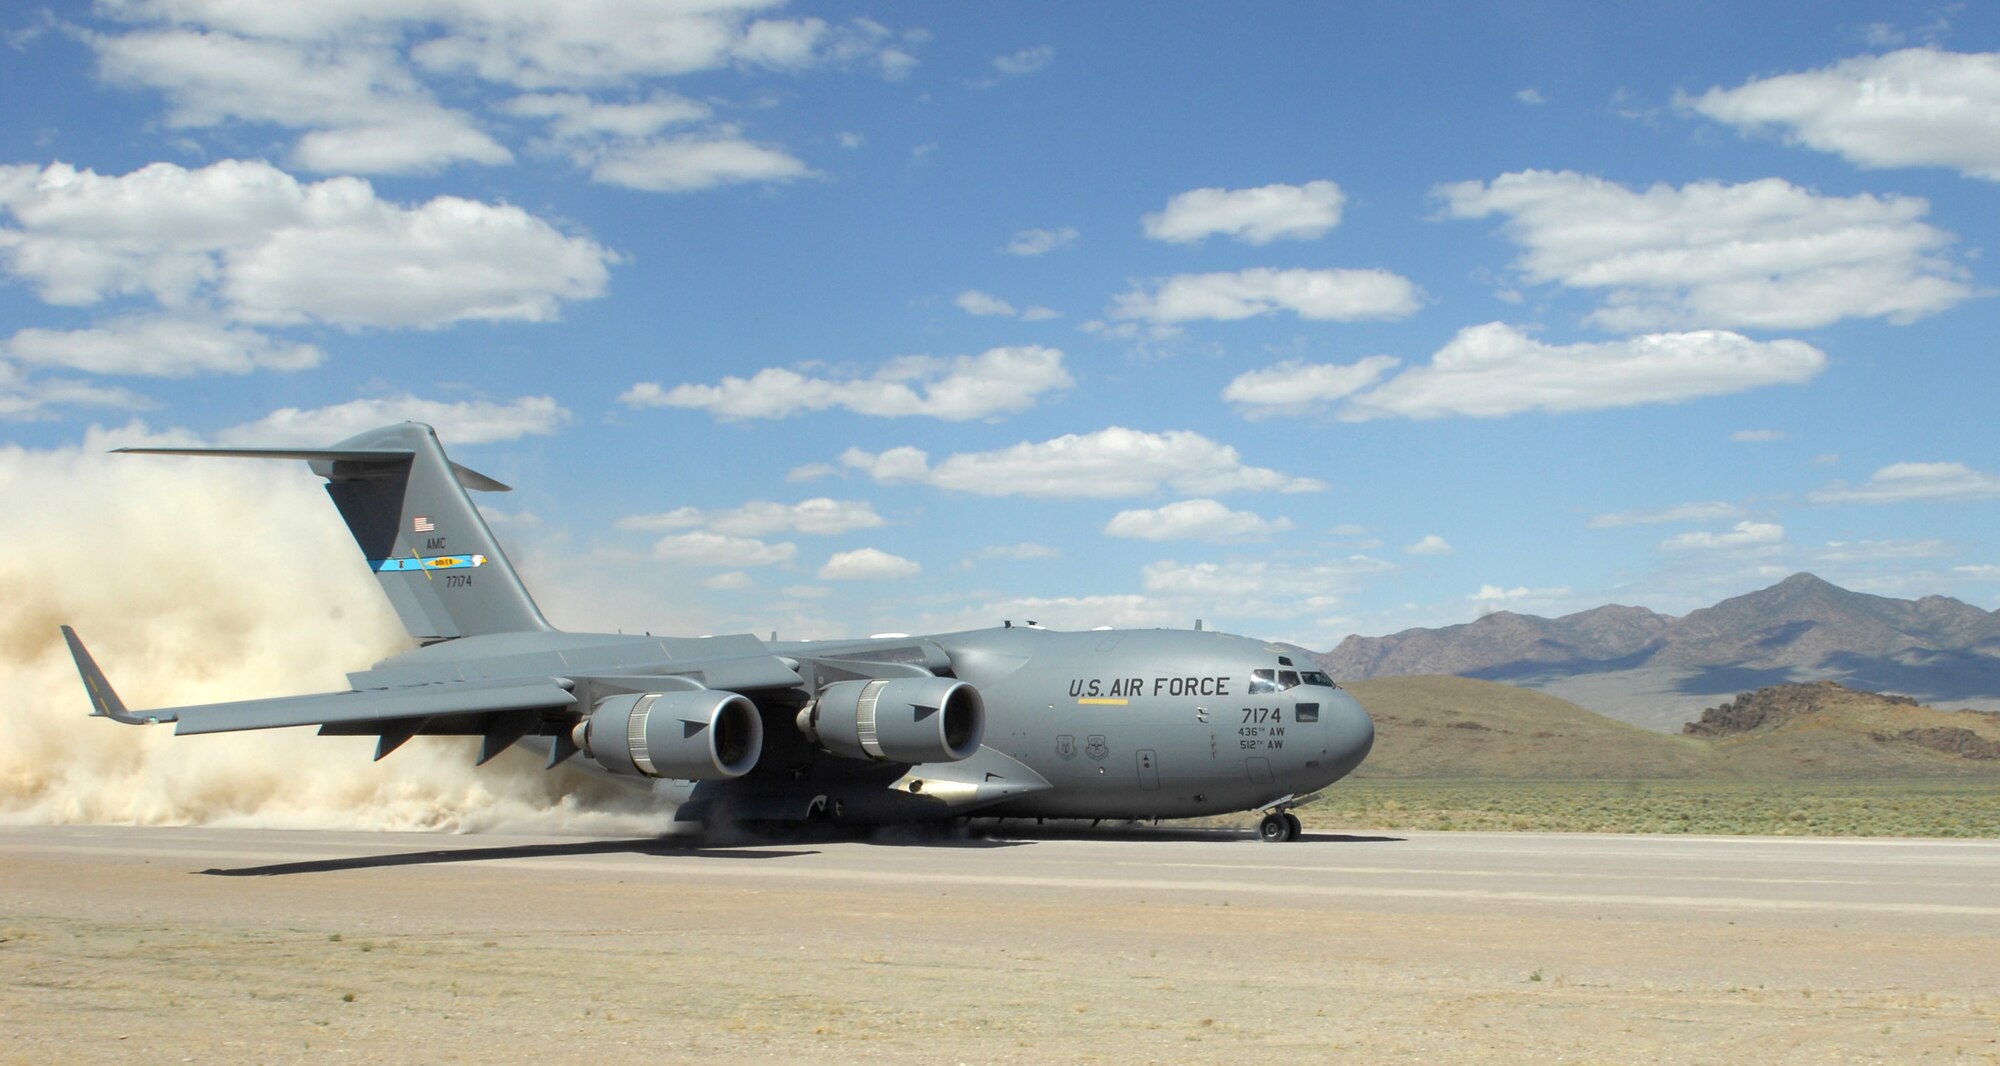 During the short take off and landing phase of the Mobility Air Forces Exercise, a C-17 Globemaster lII lands on a dirt landing zone at the Nevada Test and Training Range near Nellis Air Force Base, Nev.  The 29th Weapons Squadron provides advanced tactical training to C-130 Hercules aircrew selected to attend the Weapons School here. The six-month, graduate-level course culminates in a massive airlift mission, called the Mobility Air Forces Exercise. More than 30 airlift assets and hundreds of support personnel from across the Air Force participate in the biannual training exercise. (U.S. Air Force photo/Staff Sgt. Taylor Worley)